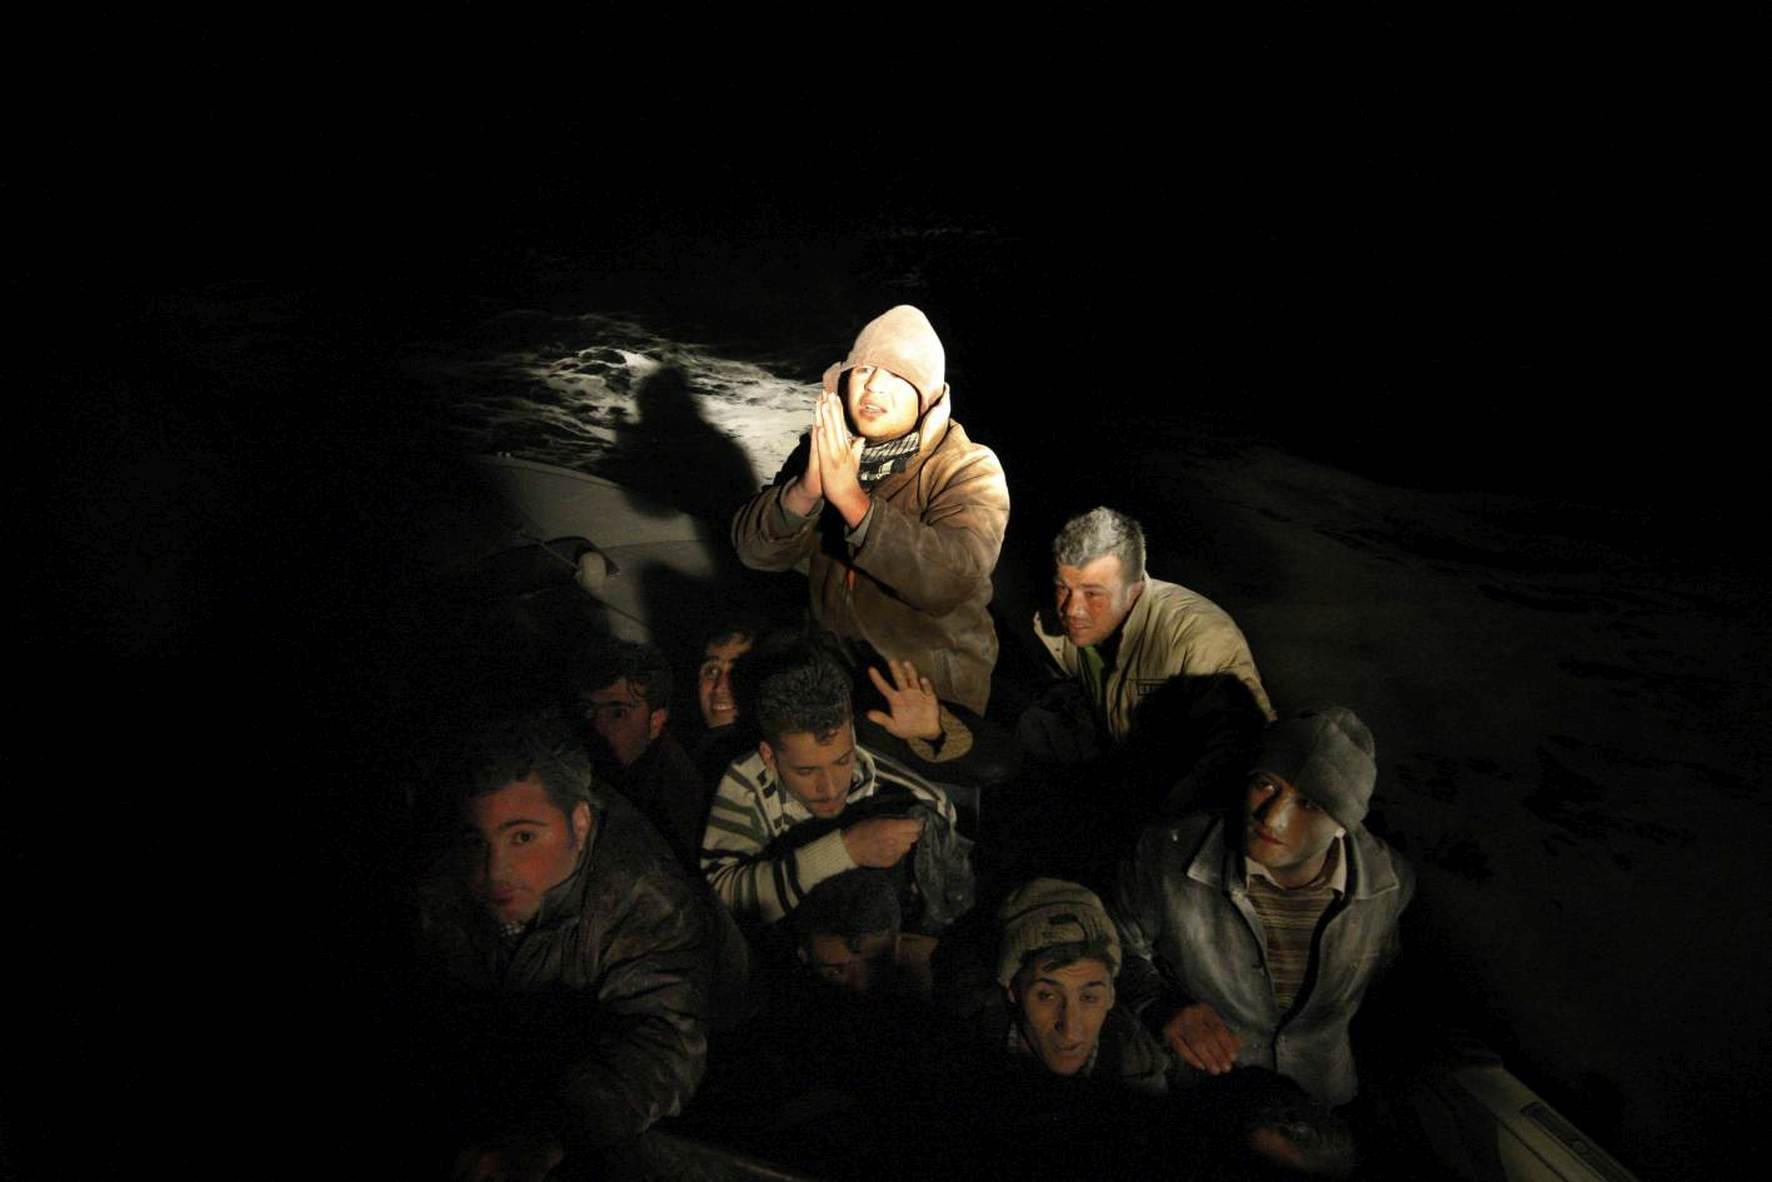 Greece/ Agathonisi /April 17,2009. During a night patrol in Agathonisi island, men of the Greek Coast Guard apprehend a boat with 16 immigrants, who were trying to cross the Aegean Sea. During the night long operation, they had to shoot to the engine of the speedboat and two smugglers were arrested.